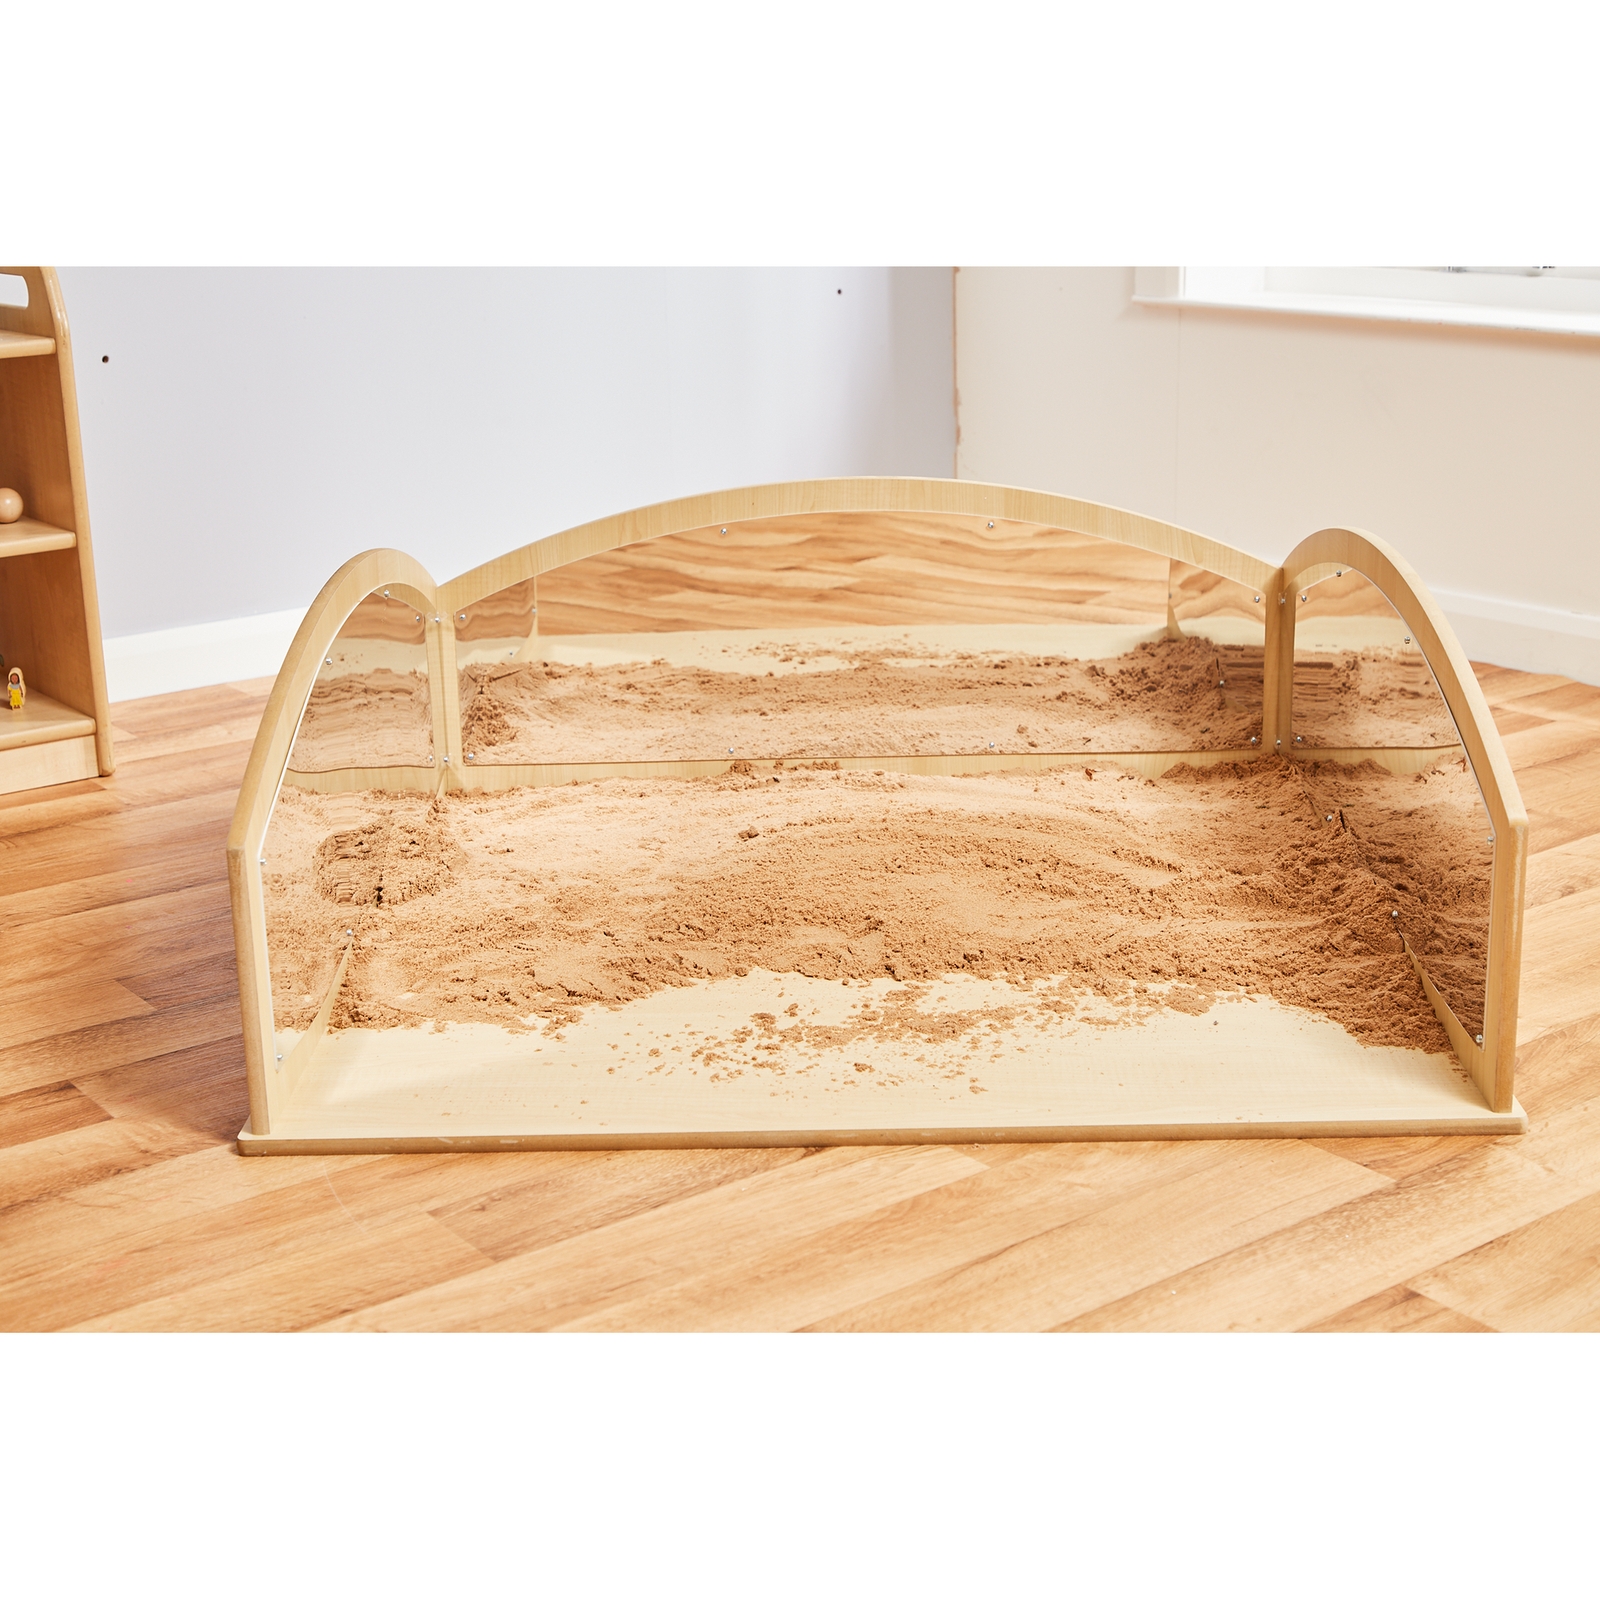 Wooden Crawl In Sand Box With Mirrors - 1010 x 1010 x 450mm - Each